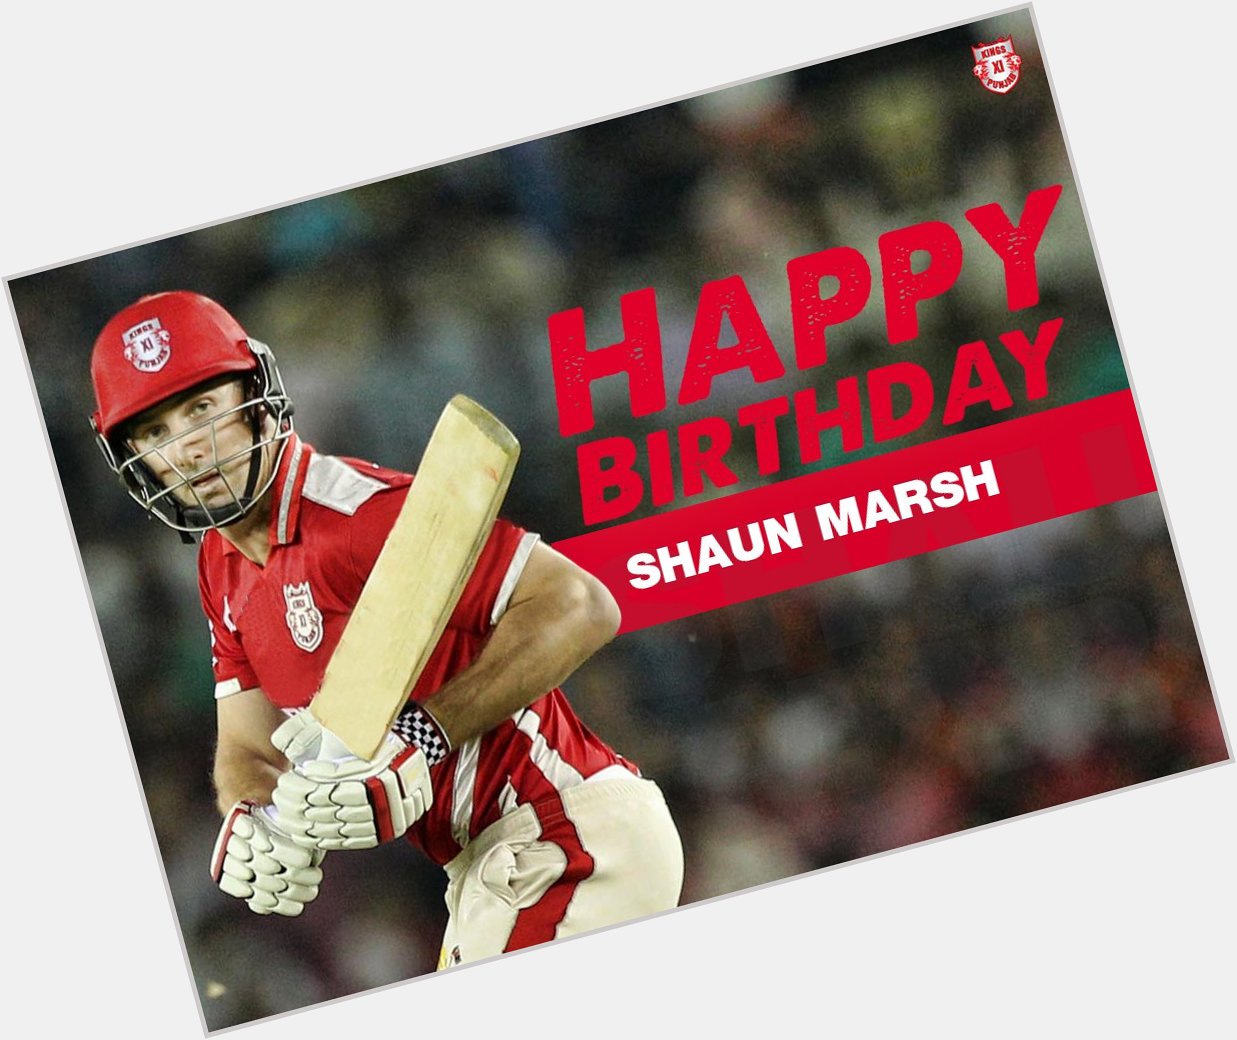 Wishing one of our former super Shaun Marsh, a very happy birthday! 